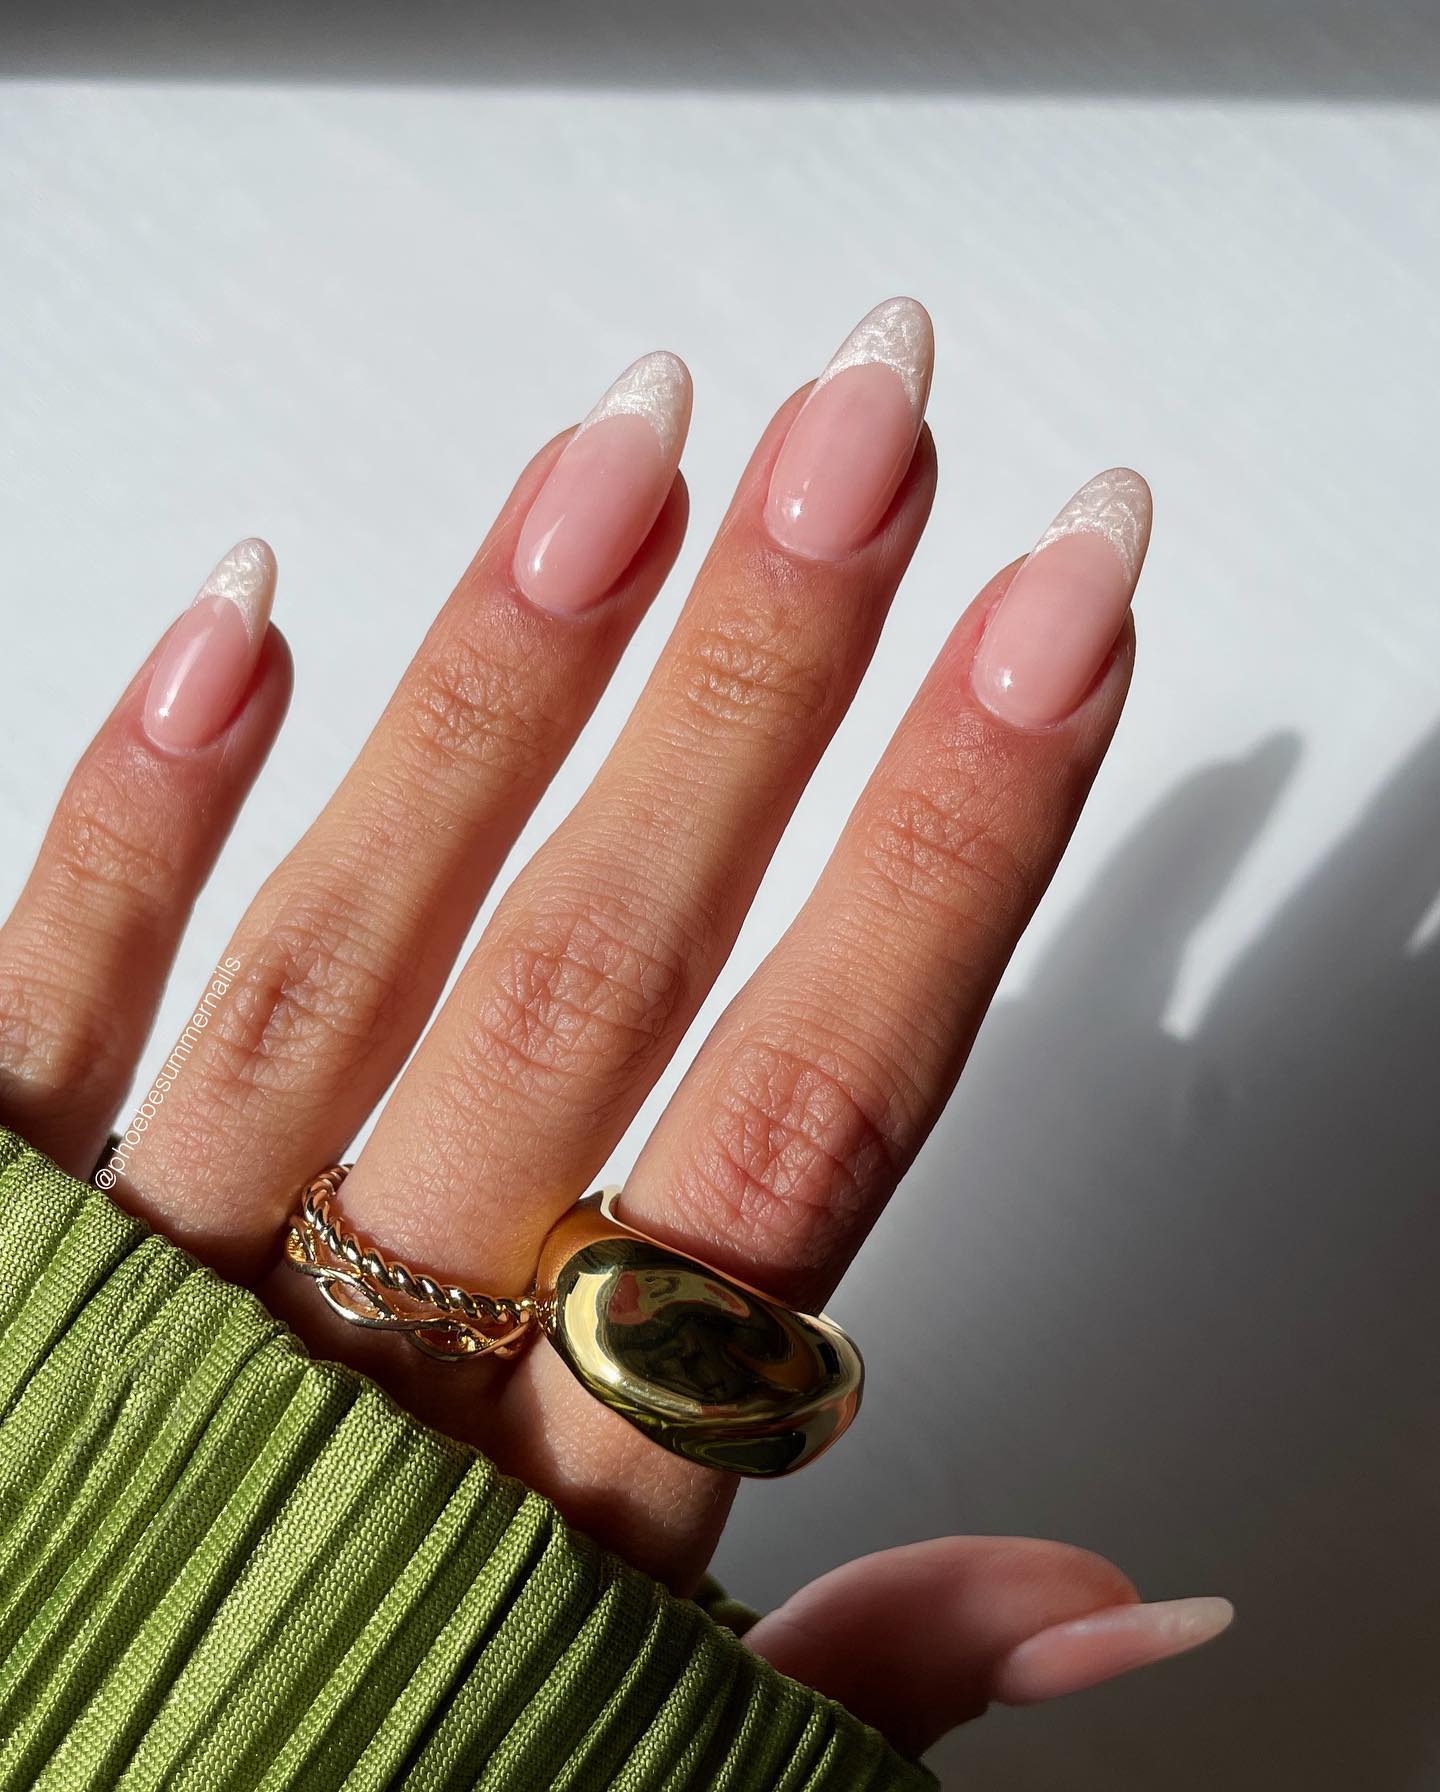 mermaid nails french manicure